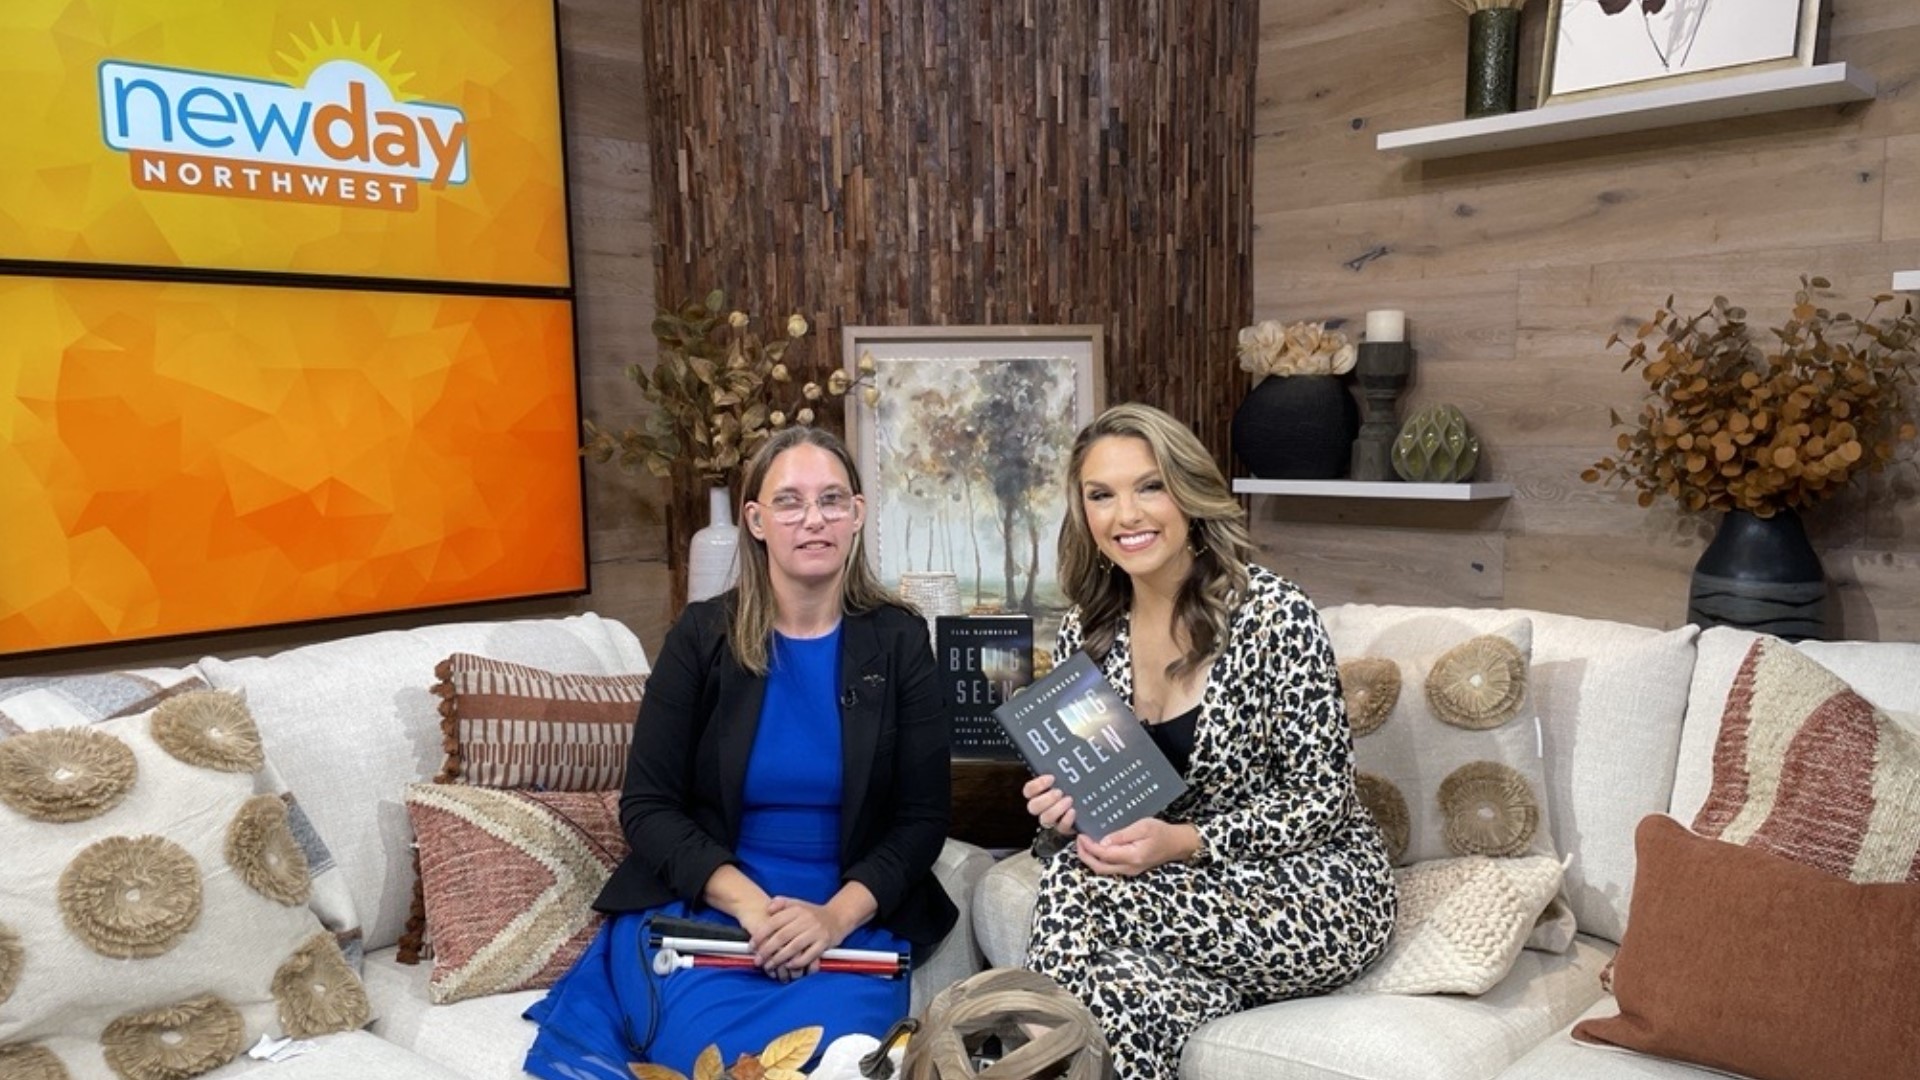 Elsa Sjunneson is a Seattle-based writer, educator, and activist. Her book "Being Seen: One Deaf-Blind Woman's Fight to end Ableism" is out now. #newdaynw